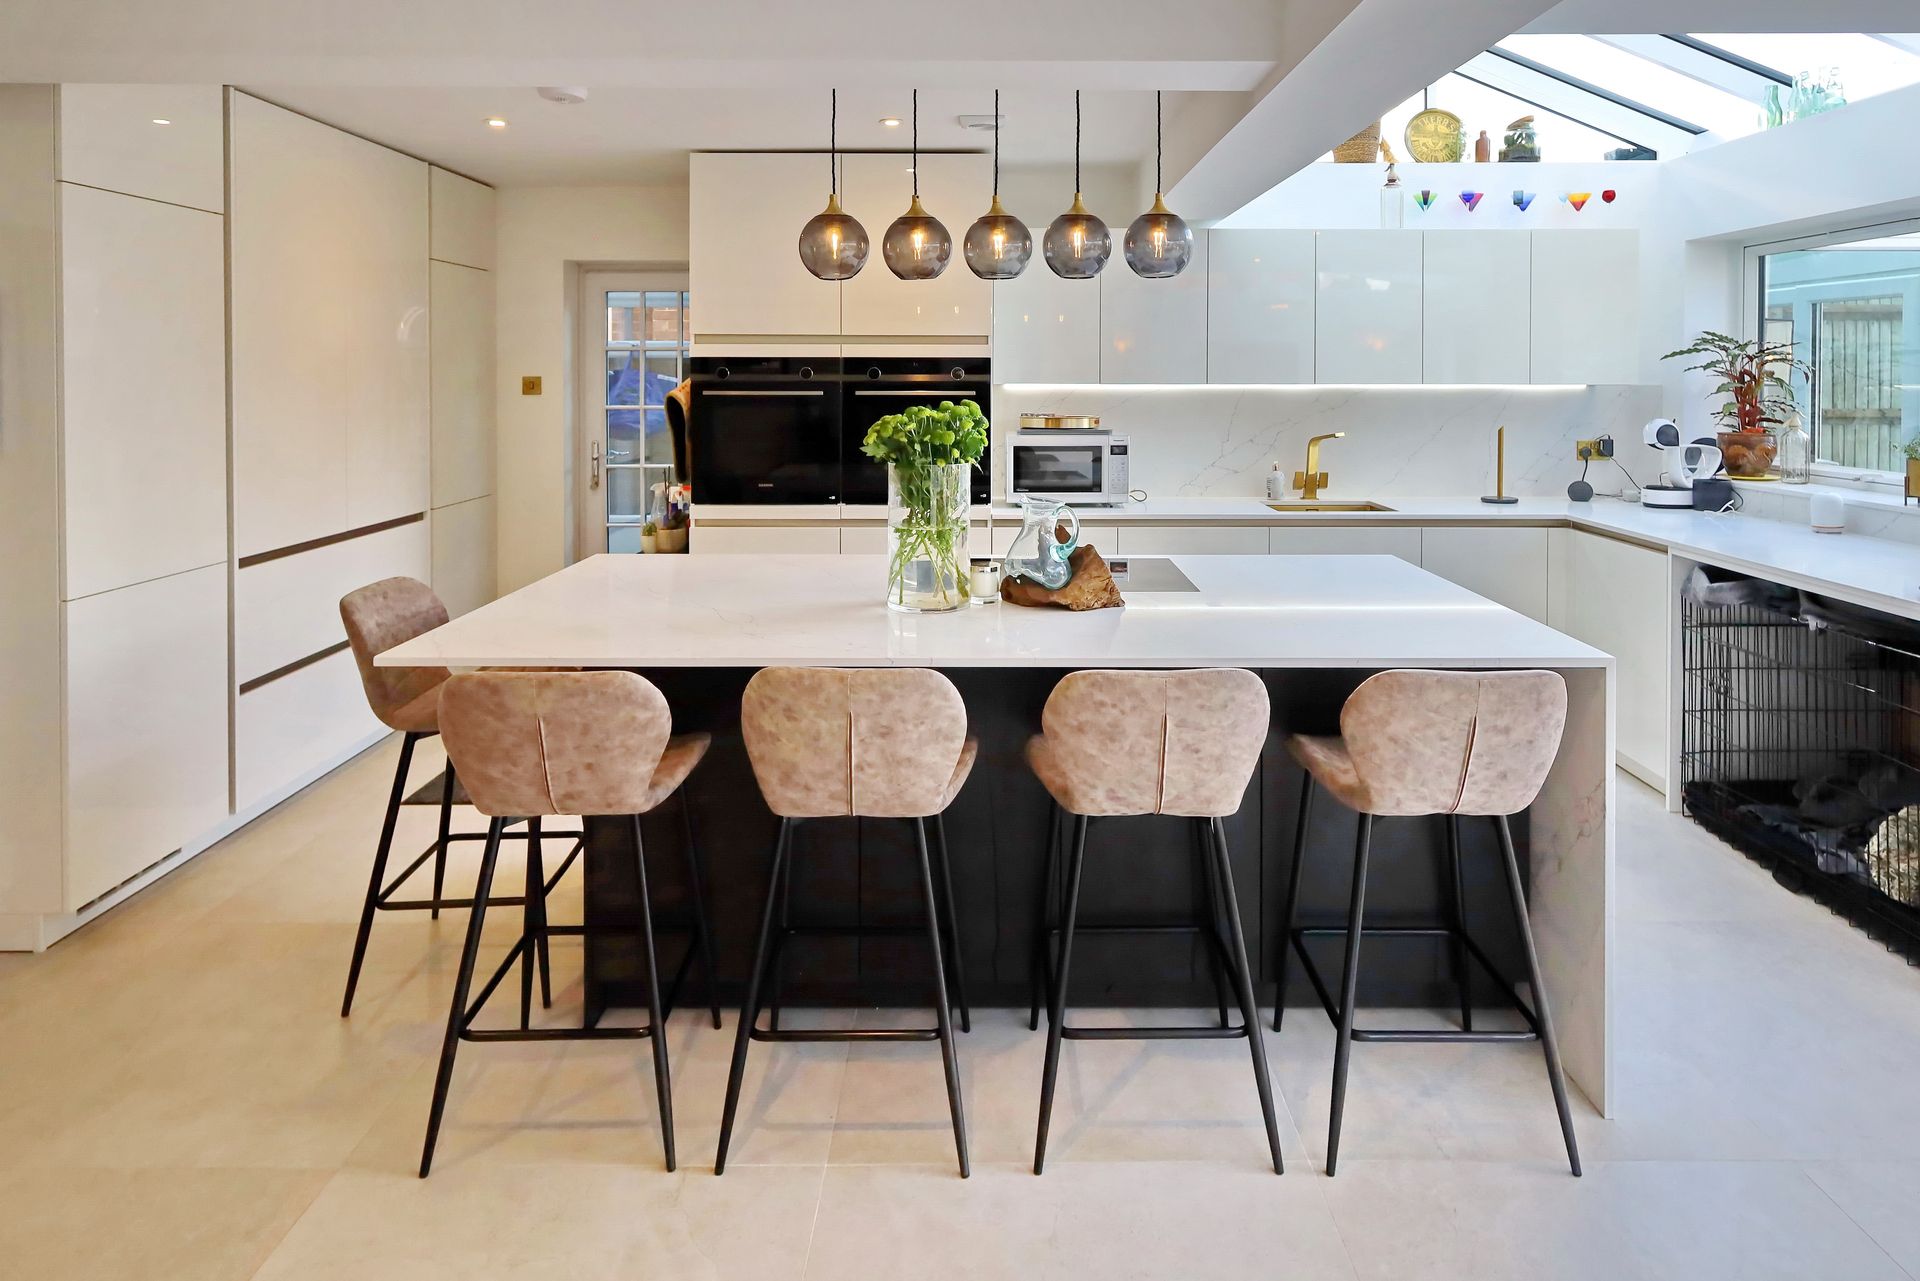 A bright modern kitchen by exact kitchens, Wokingham with tall chairs around a large kitchen island